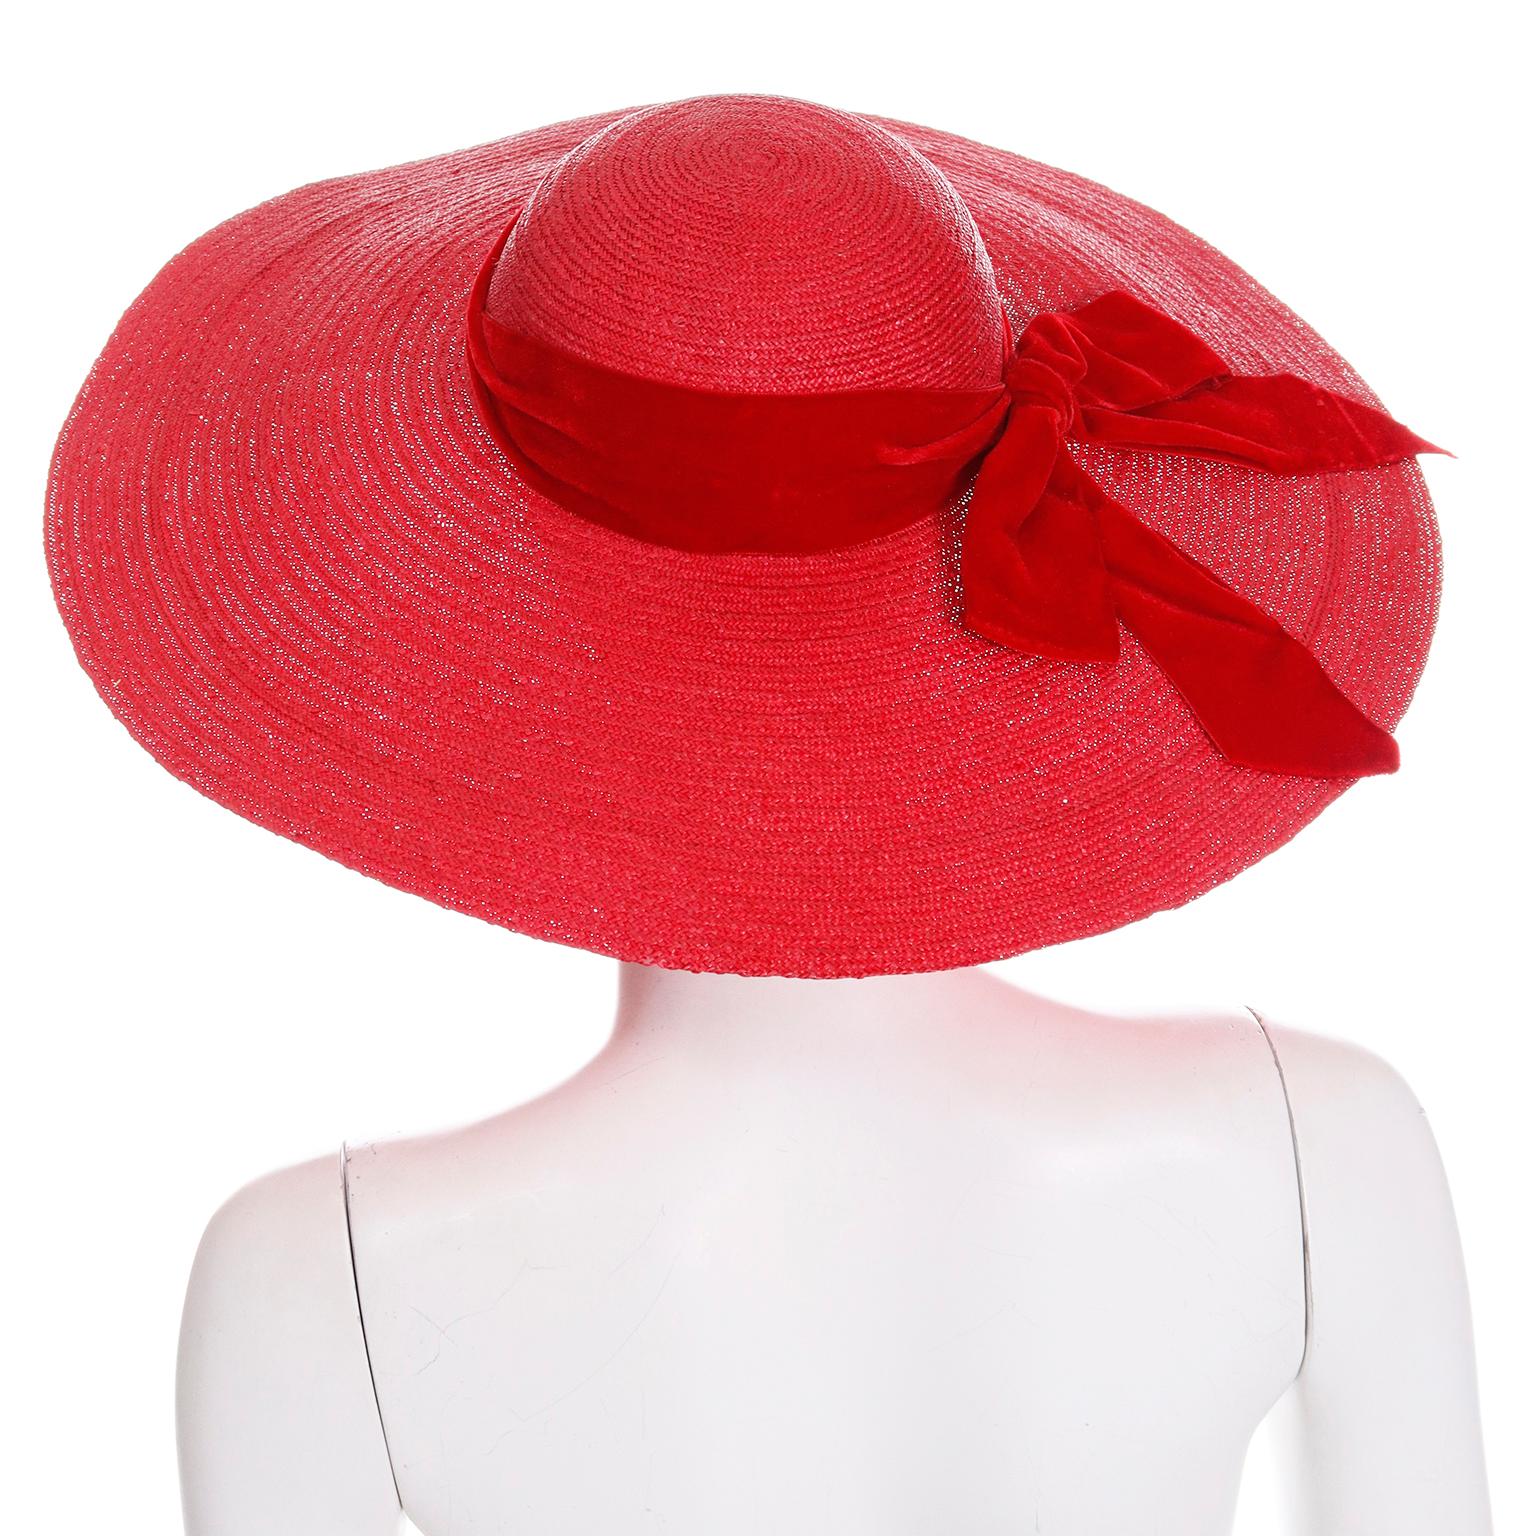 Vintage 1940s Wide Brim Red Straw Hat With Red Velvet Ribbon by Mr Leon In Excellent Condition For Sale In Portland, OR